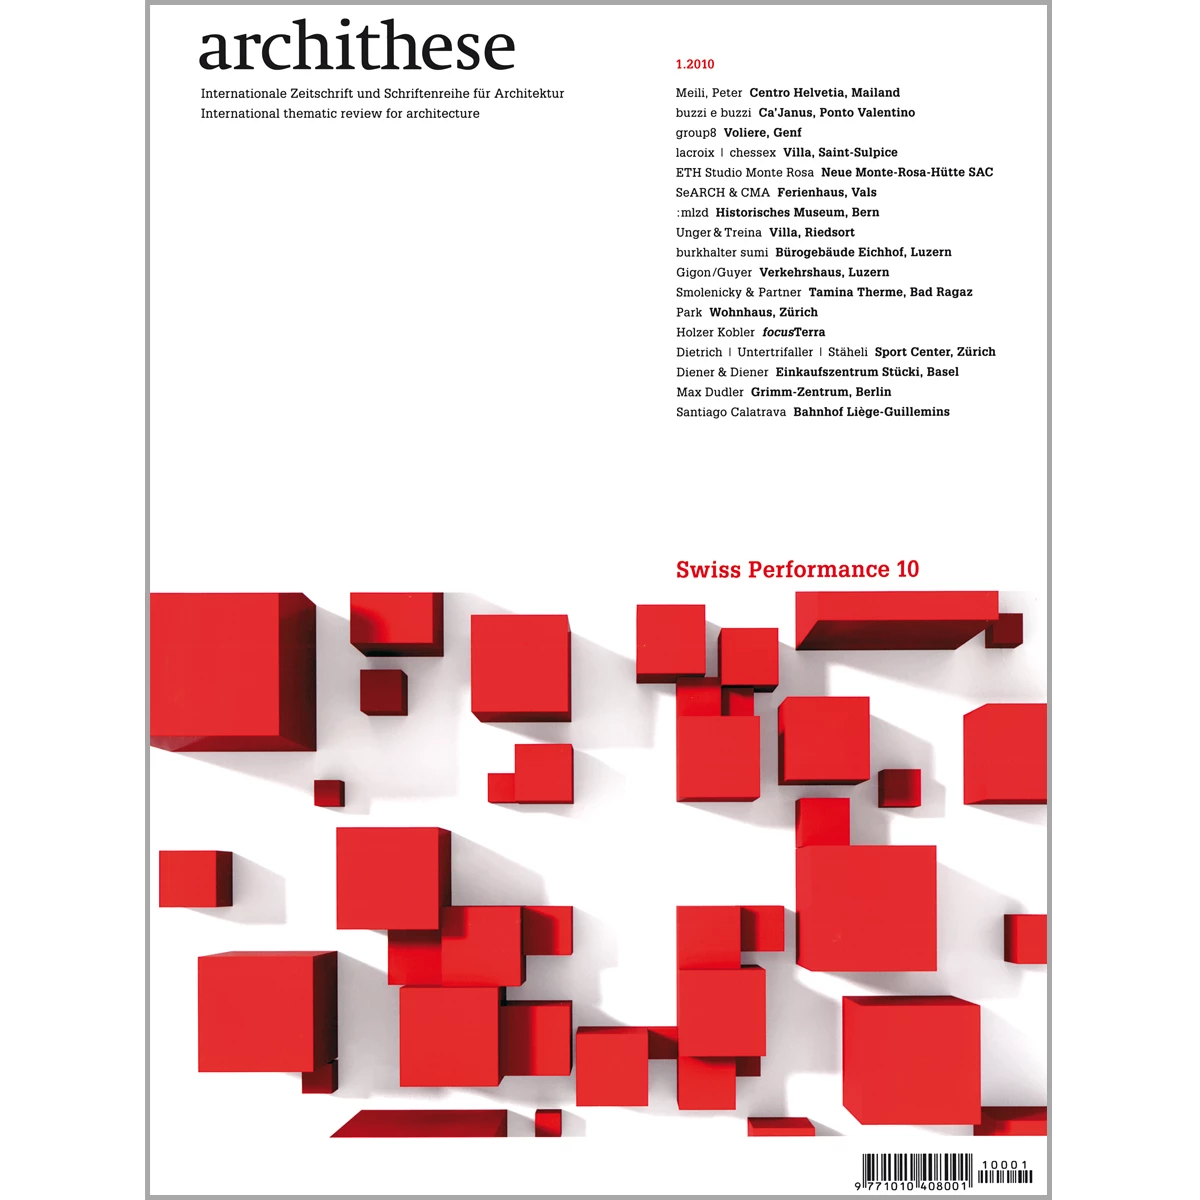 Archithese: Swiss Performance 10